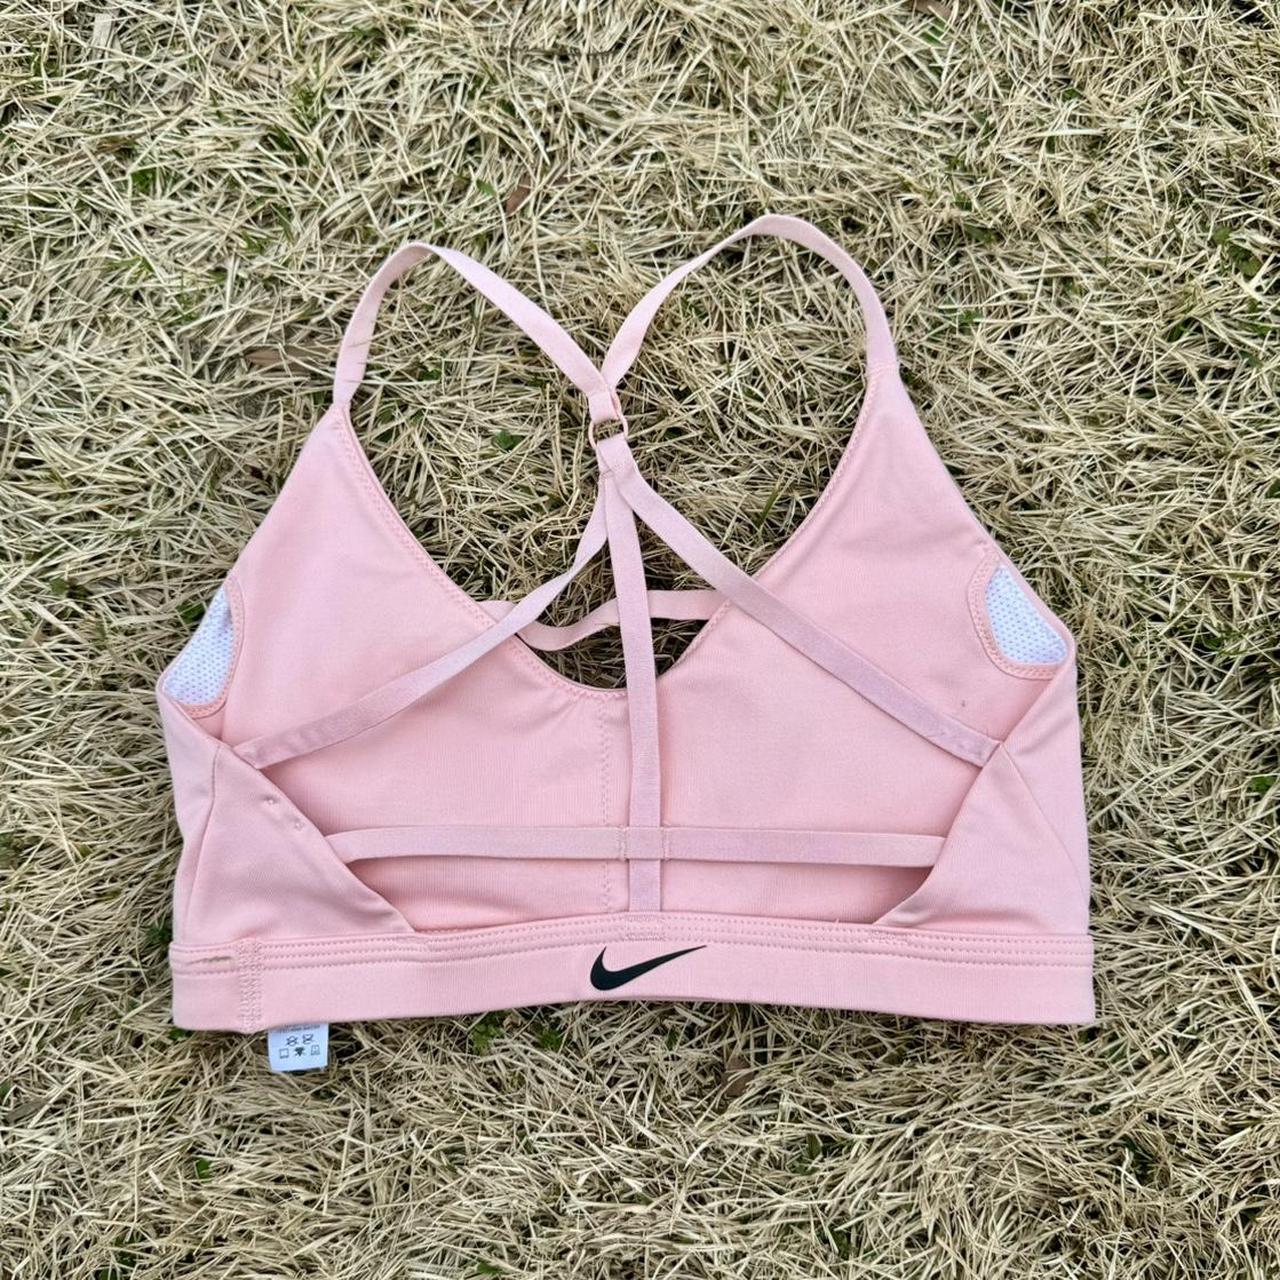 Athletic romper size s Built in bra and literally - Depop